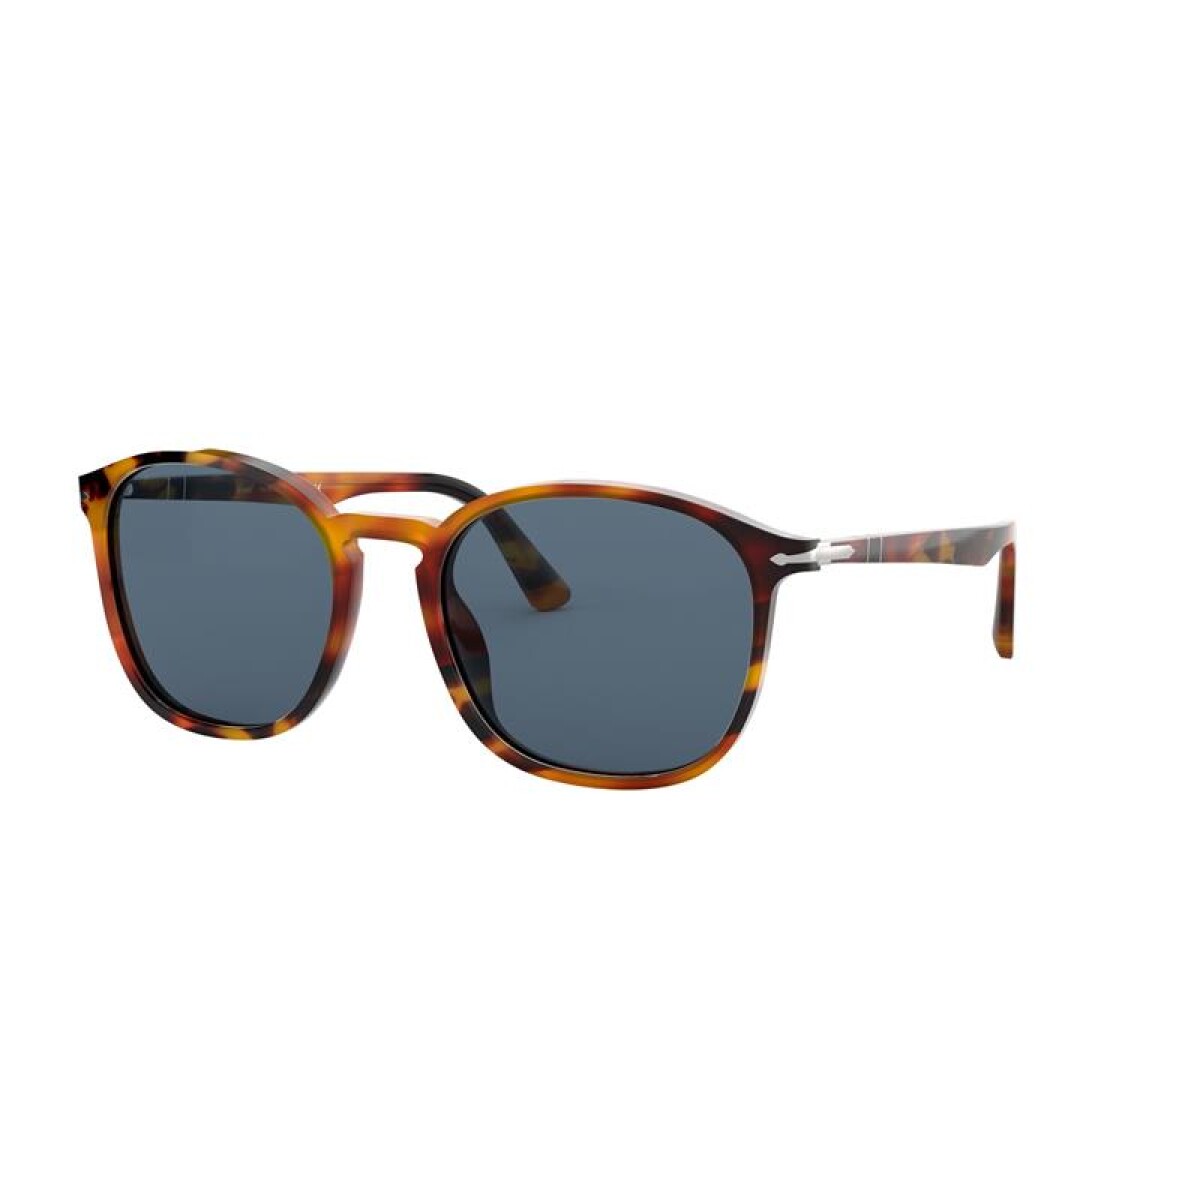 Persol 3215-s - 1082/56 